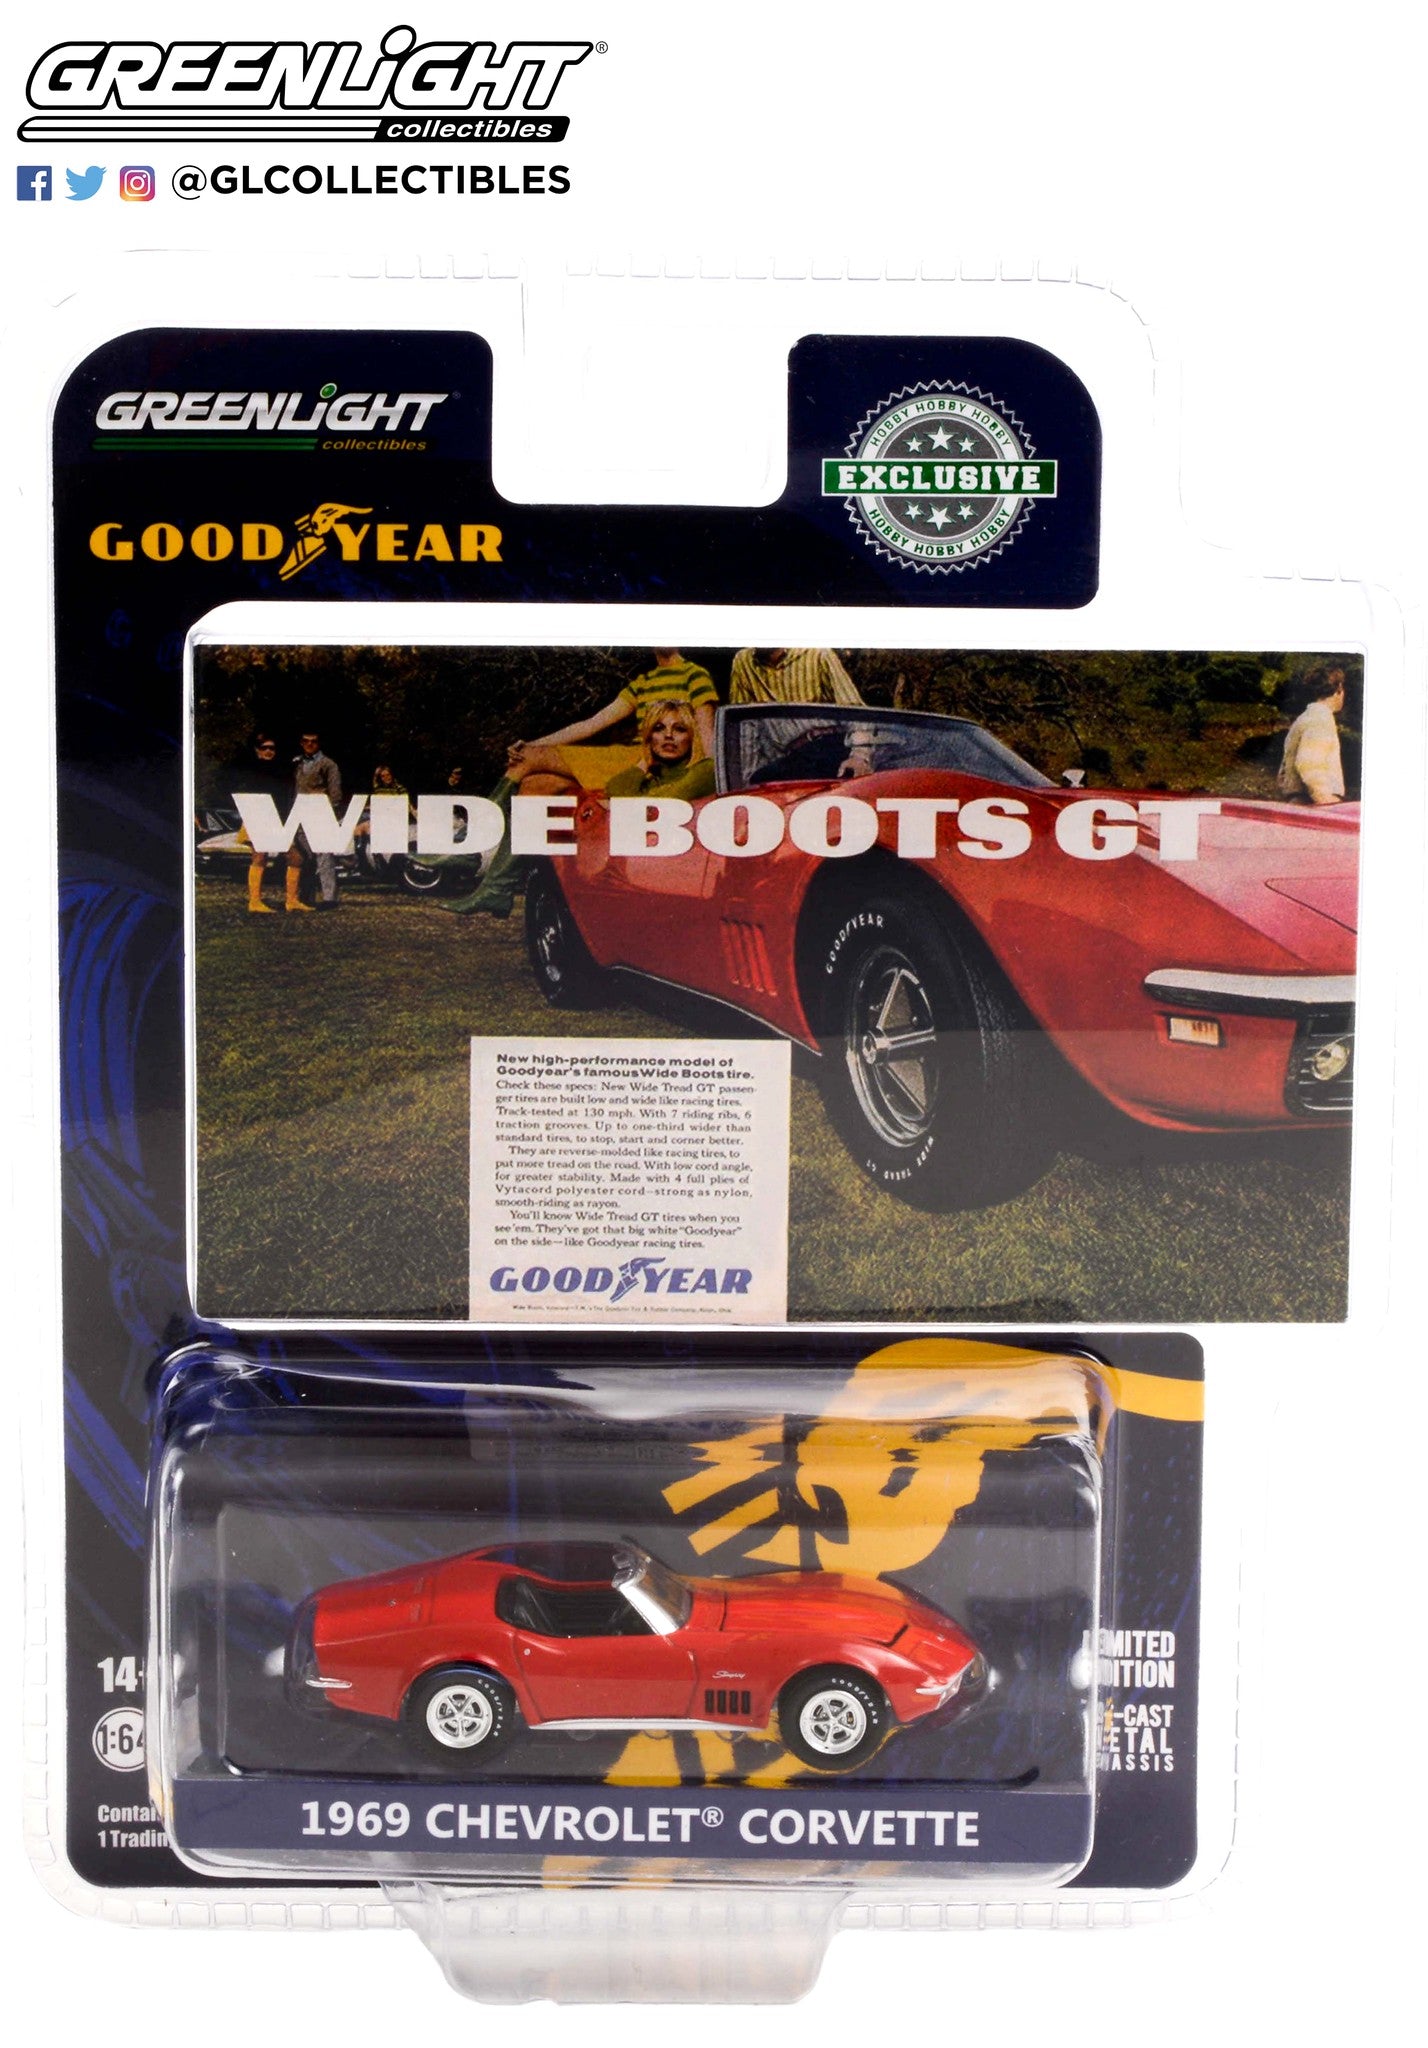 GreenLight 1:64 Goodyear Vintage Ad Cars - 1969 Chevrolet Corvette - Wide Boots Wide Boots GT 30248